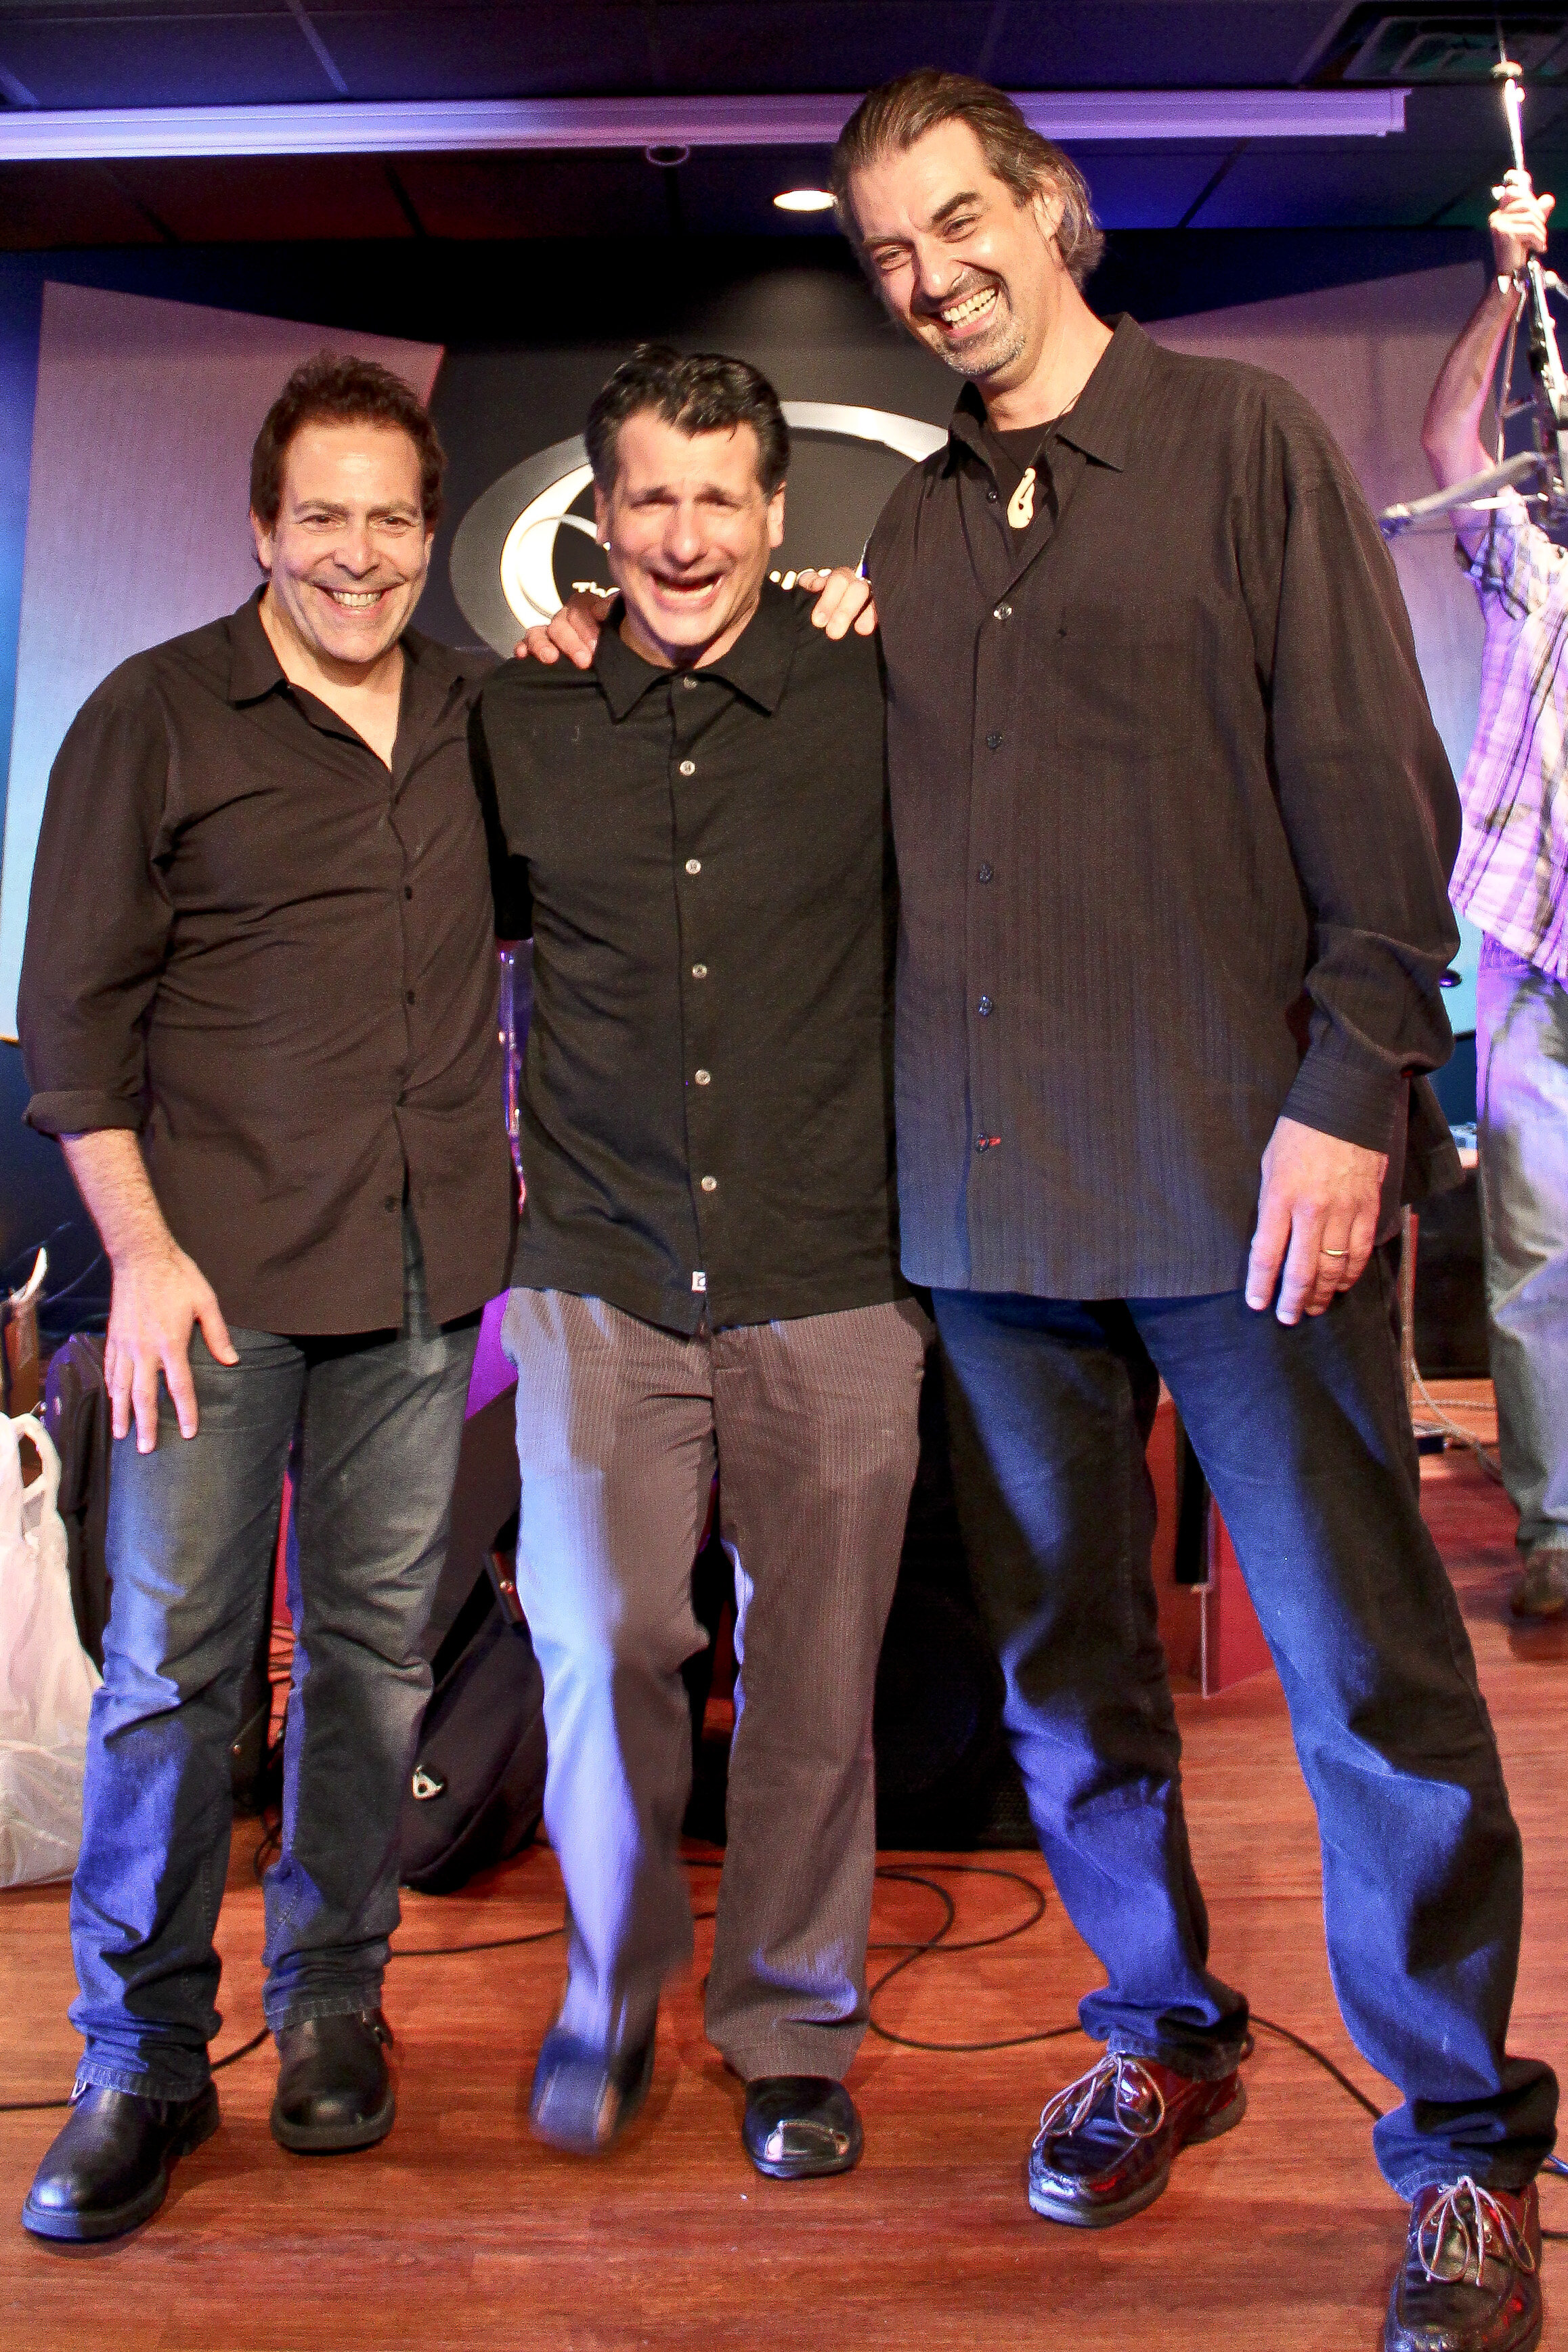 Mike Visceglia, John Patitucci and Patrick Pfeiffer at Bass Immersion Day Summer 2011